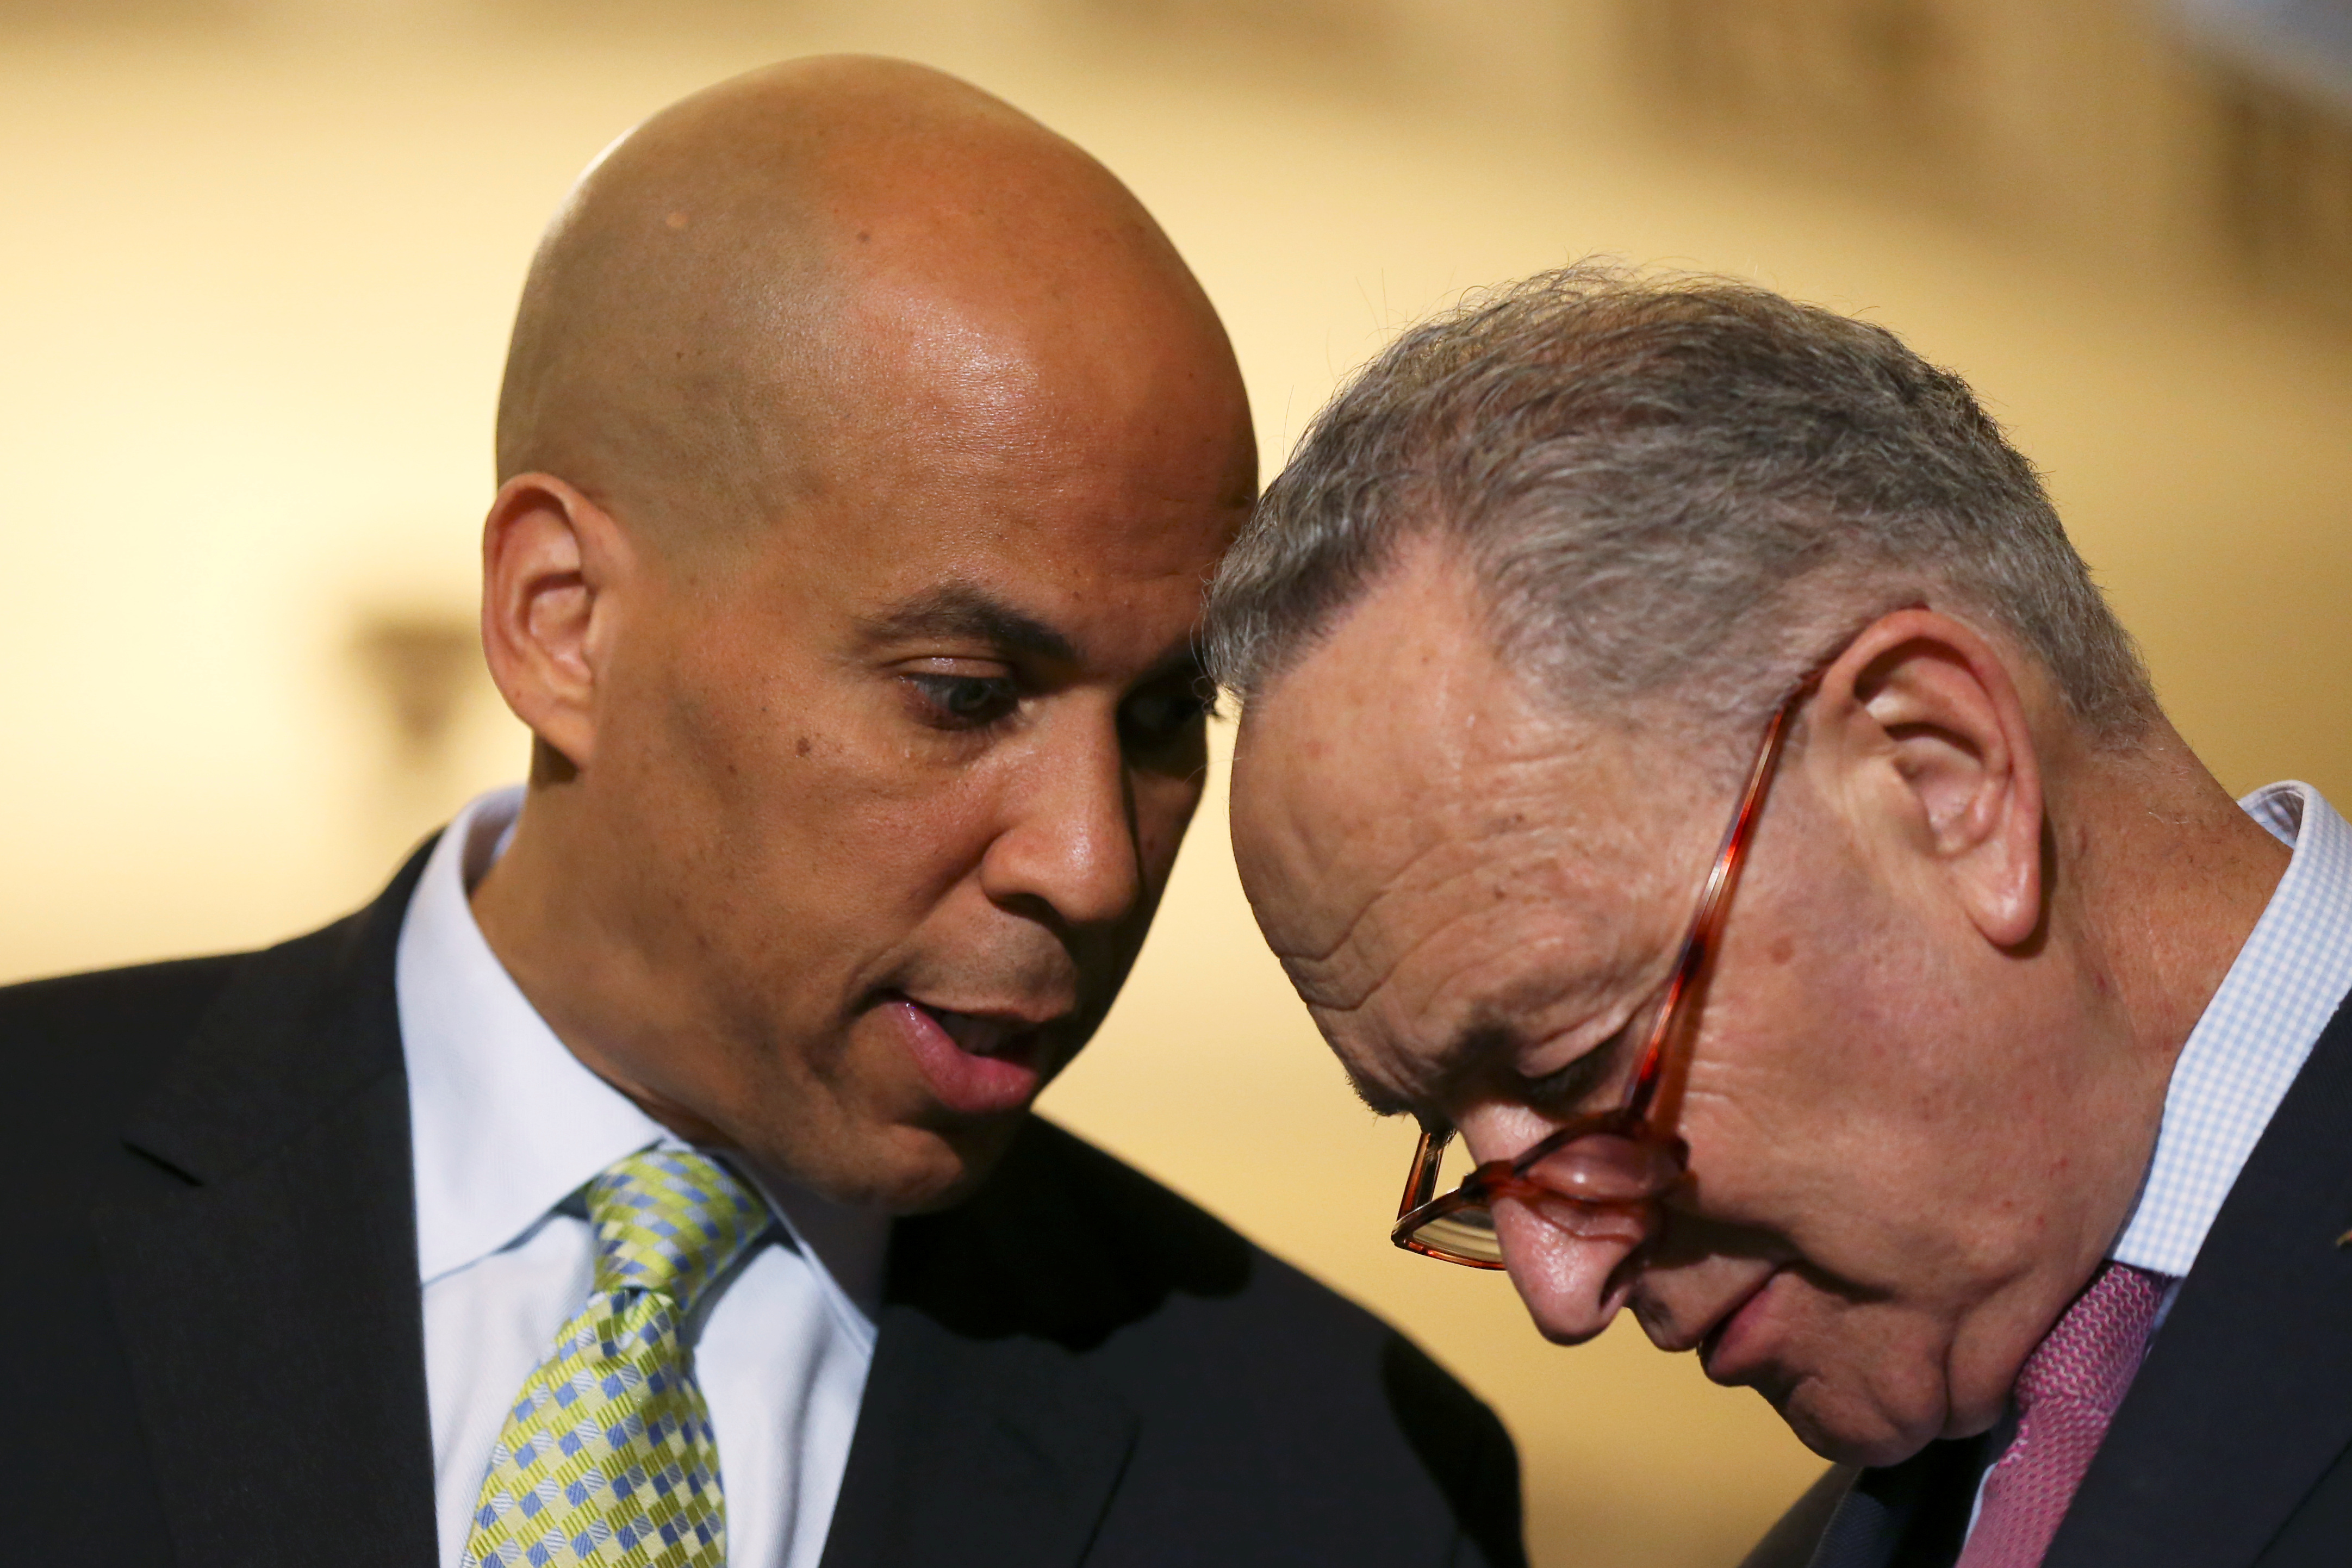 Senator Schumer confers with Booker after Senate Democratic weekly policy lunch on Capitol Hill in Washington